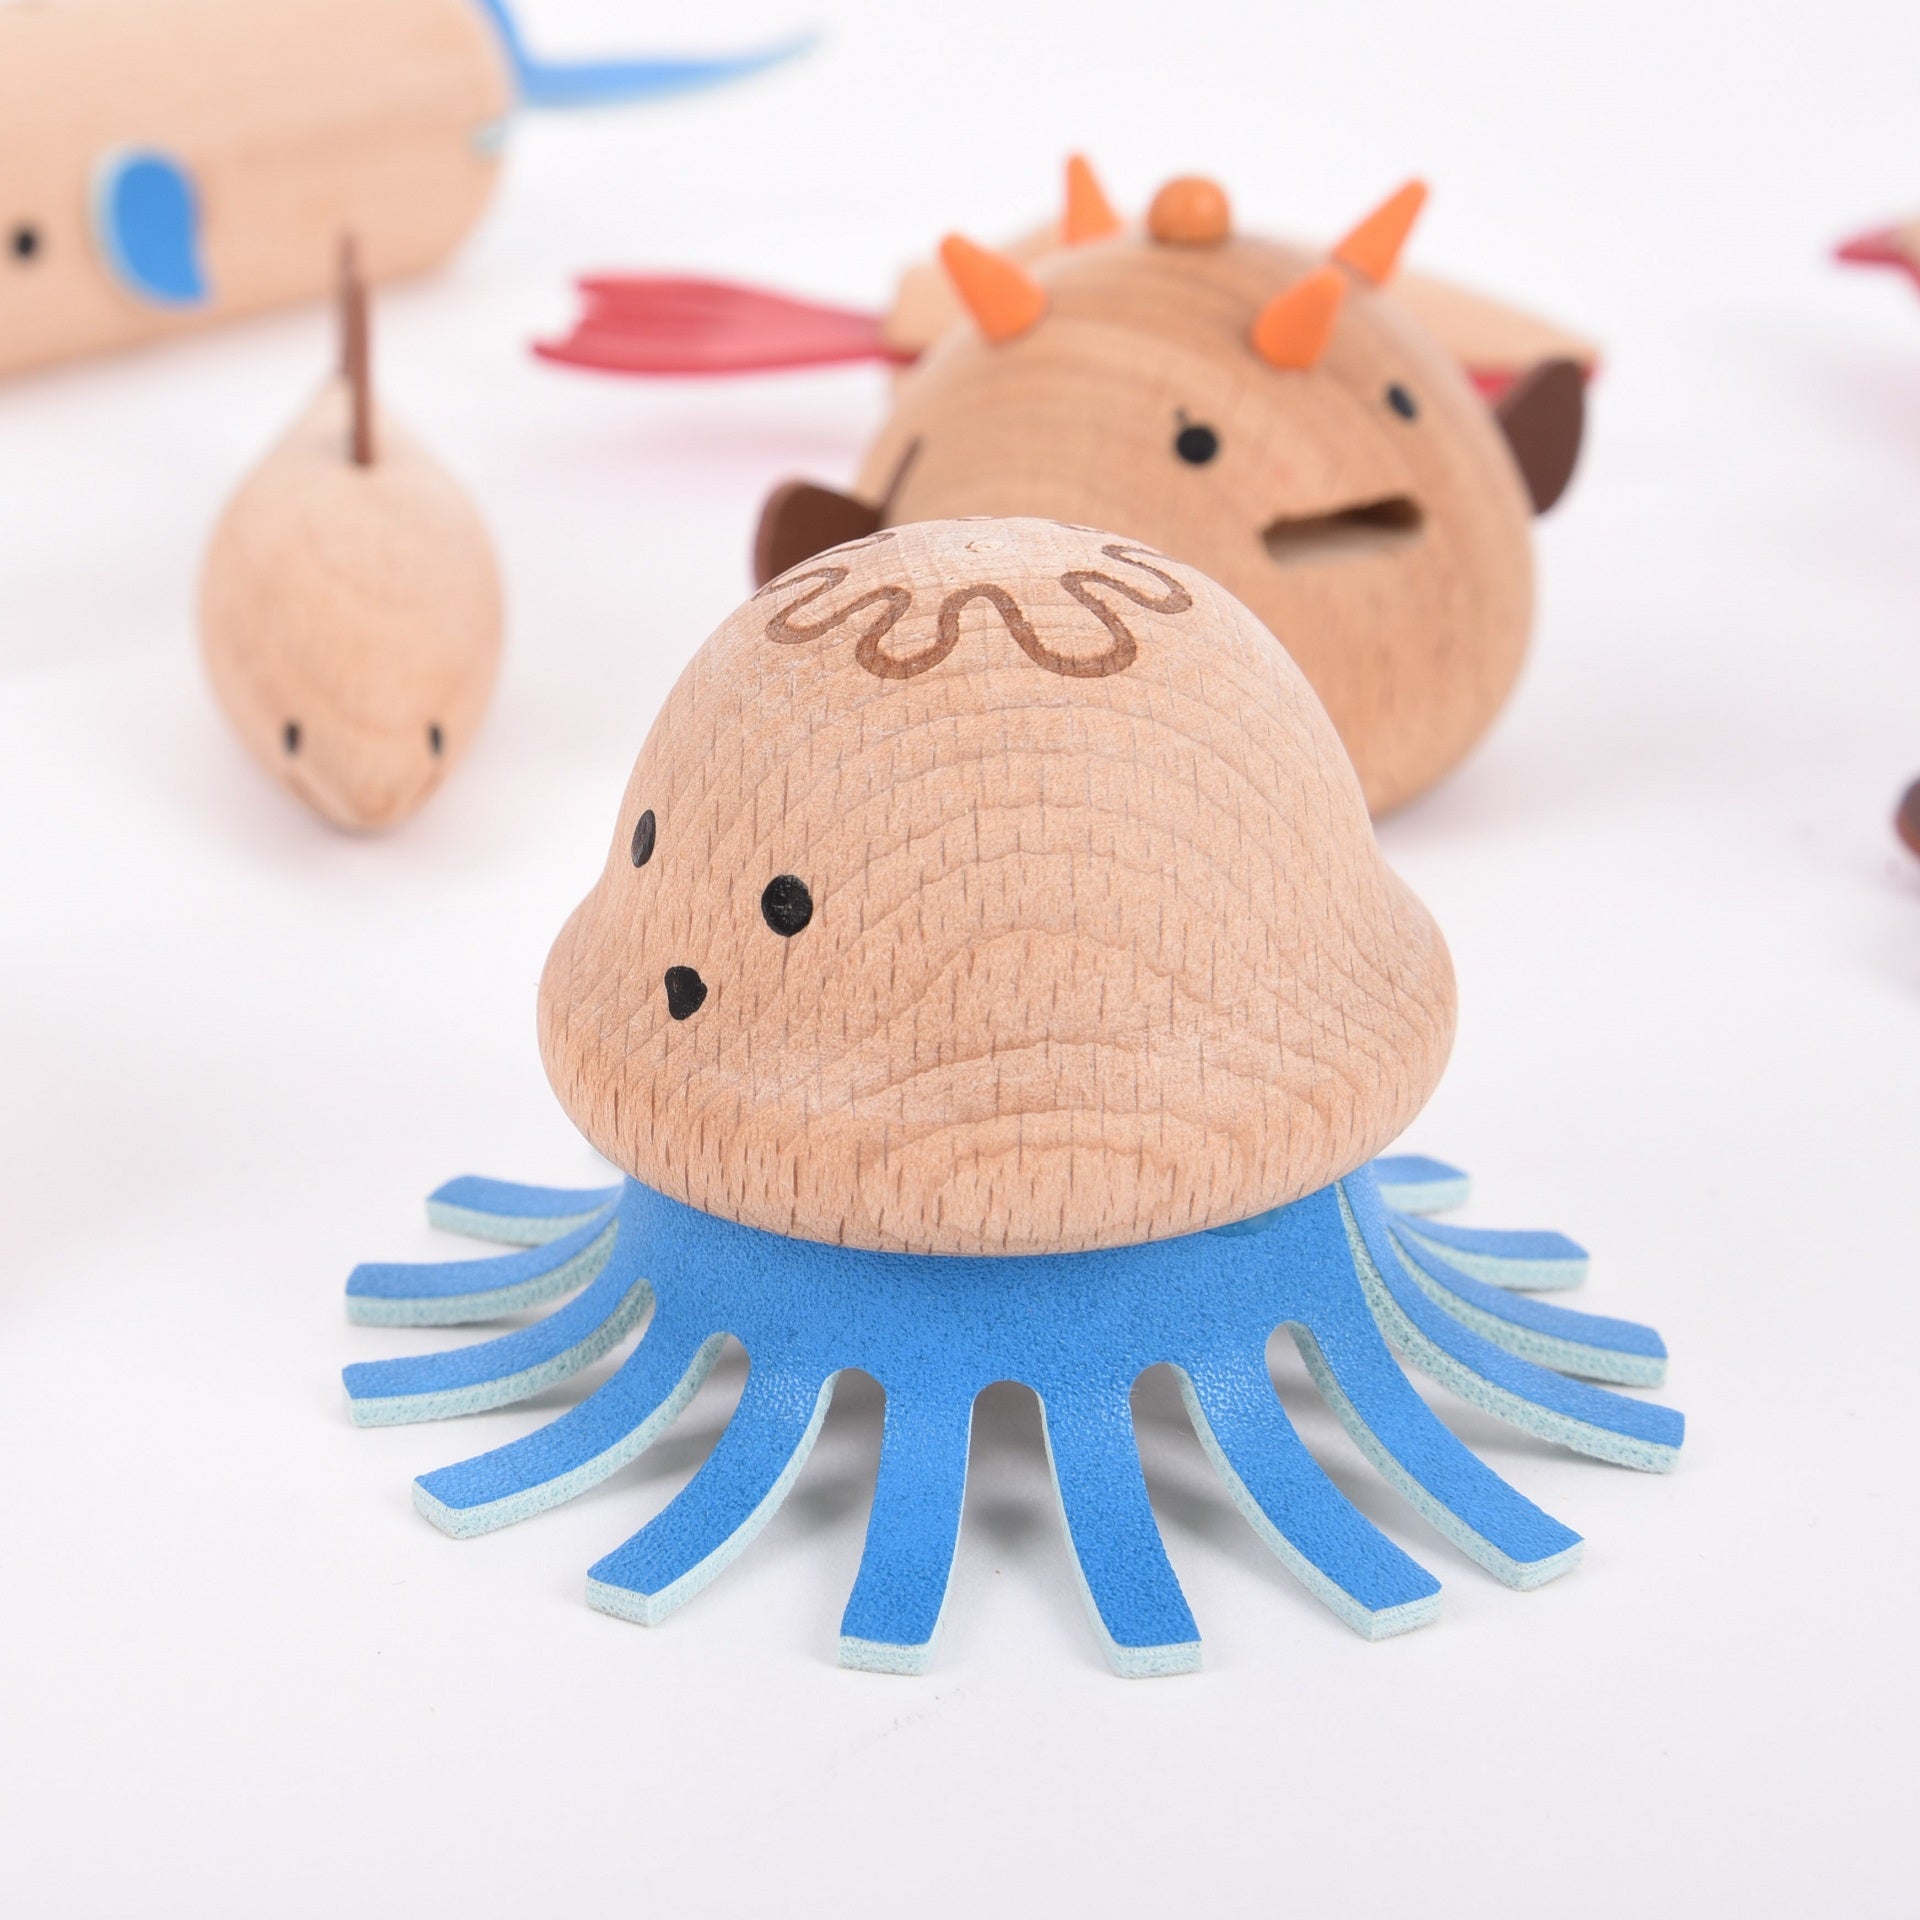 Wooden Sea Creatures, Your child will love creating their own underwater adventure with our TickiT® Wooden Sea Creatures. A beautiful set of 10 marine animals made from beautiful solid beechwood, including a puffer fish, sea horse, squid, shark, lobster, jellyfish, crab, octopus, turtle and whale. Natural and smooth with simple printed features and faux leather embellishments, these charming creatures are fun and tactile. Your child will have a 'whale' of a time using them in imaginative play, small world p